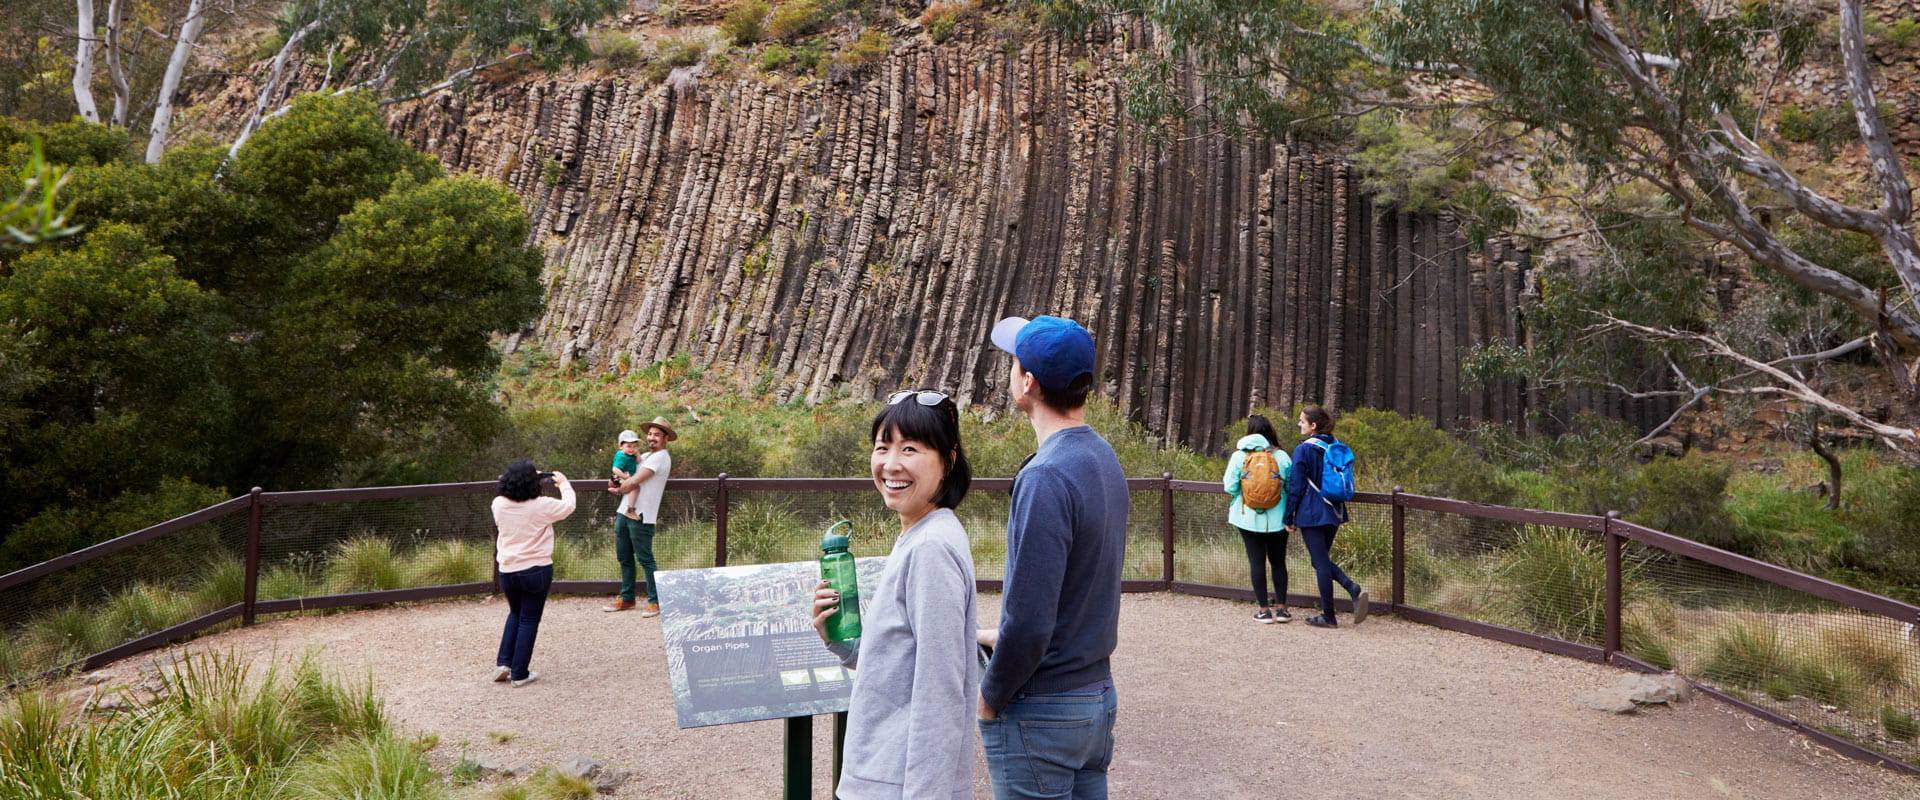 A woman holding a drink bottle stands next to a man admiring the large stone columns reaching up a rocky cliff face as a young family takes a photo in front of the natural structure against a barrier in the background.